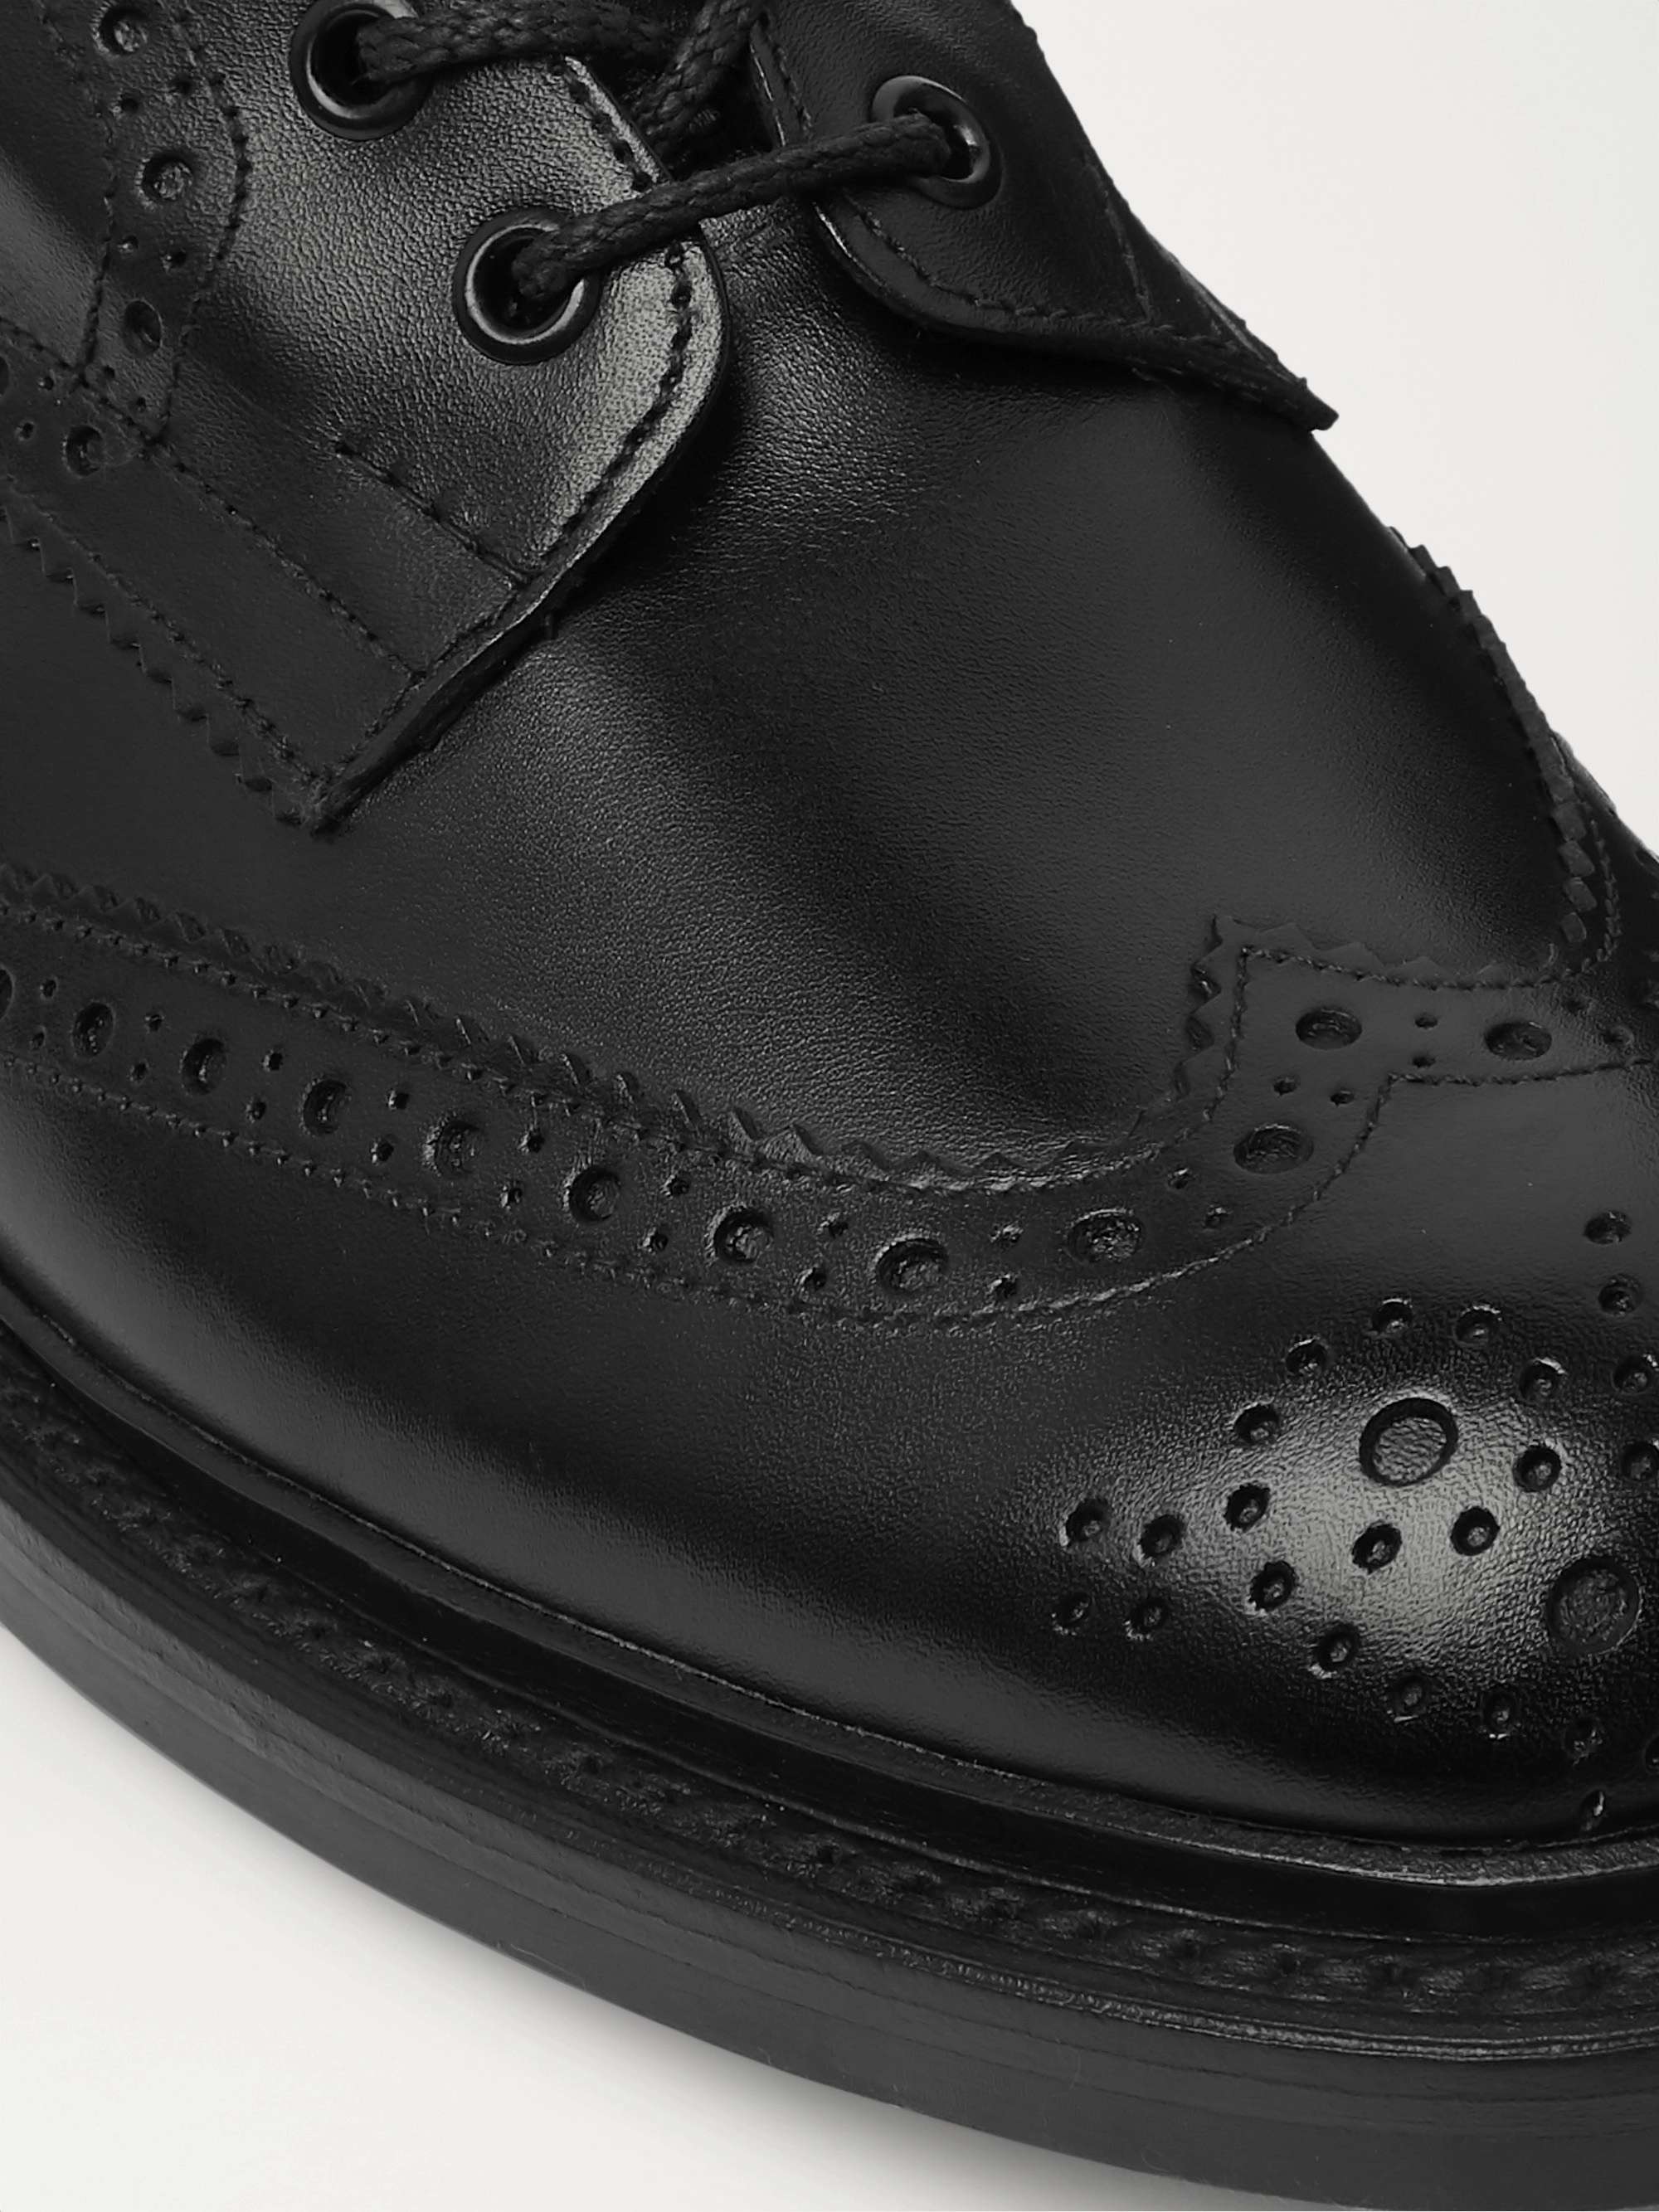 TRICKER'S Stow Full-Grain Leather Brogue Boots